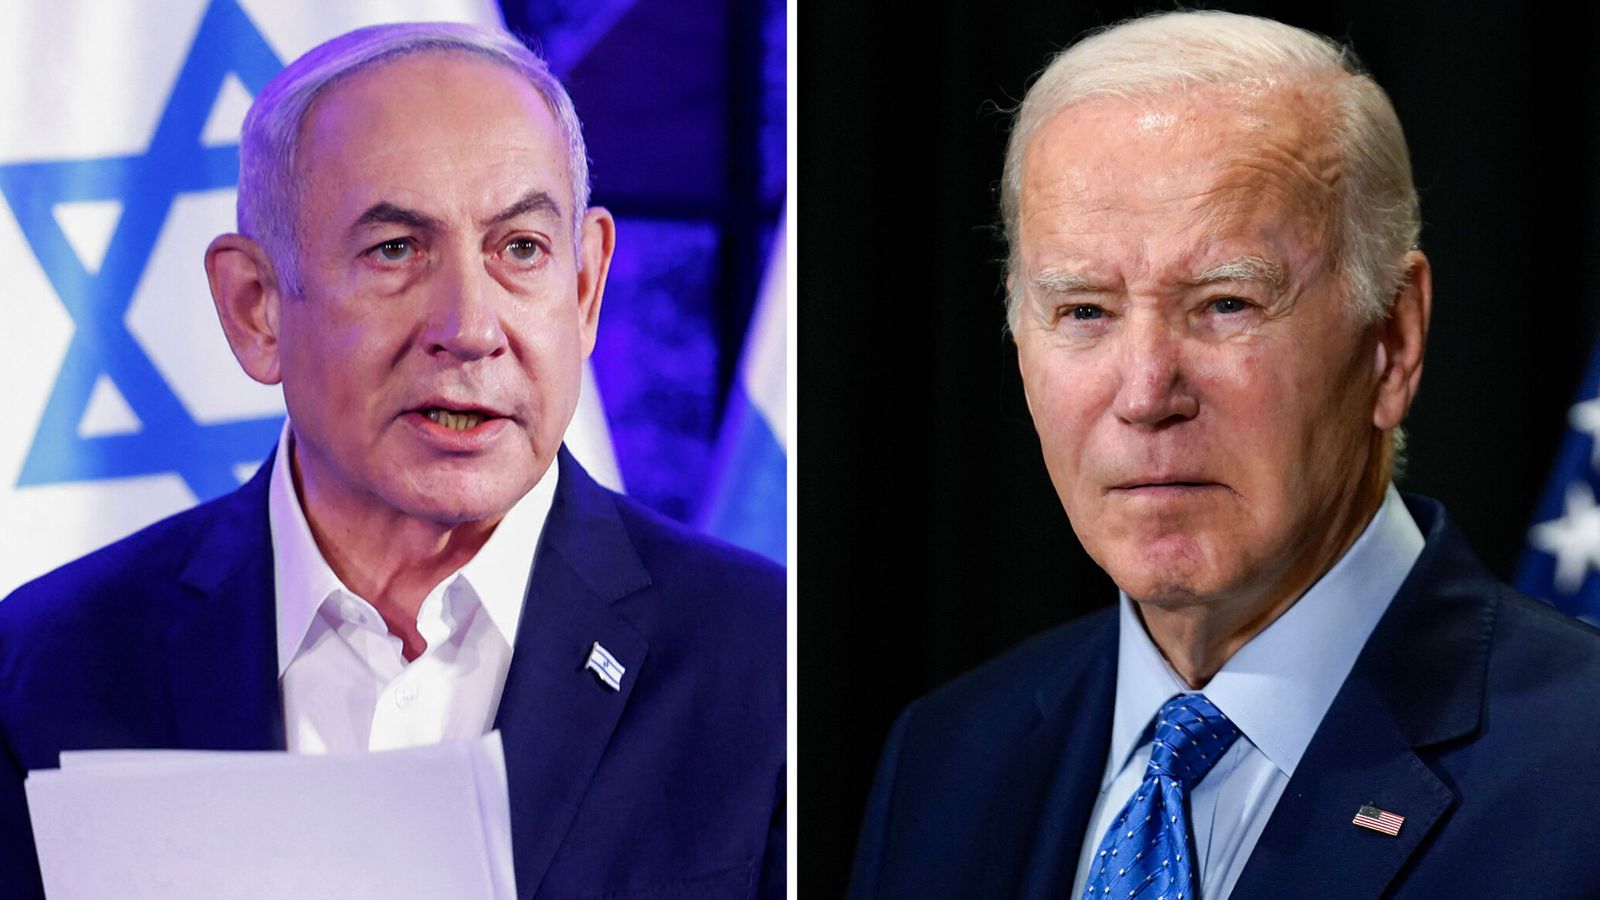 Joe Biden's open criticism shows patience with Israel is wearing thin